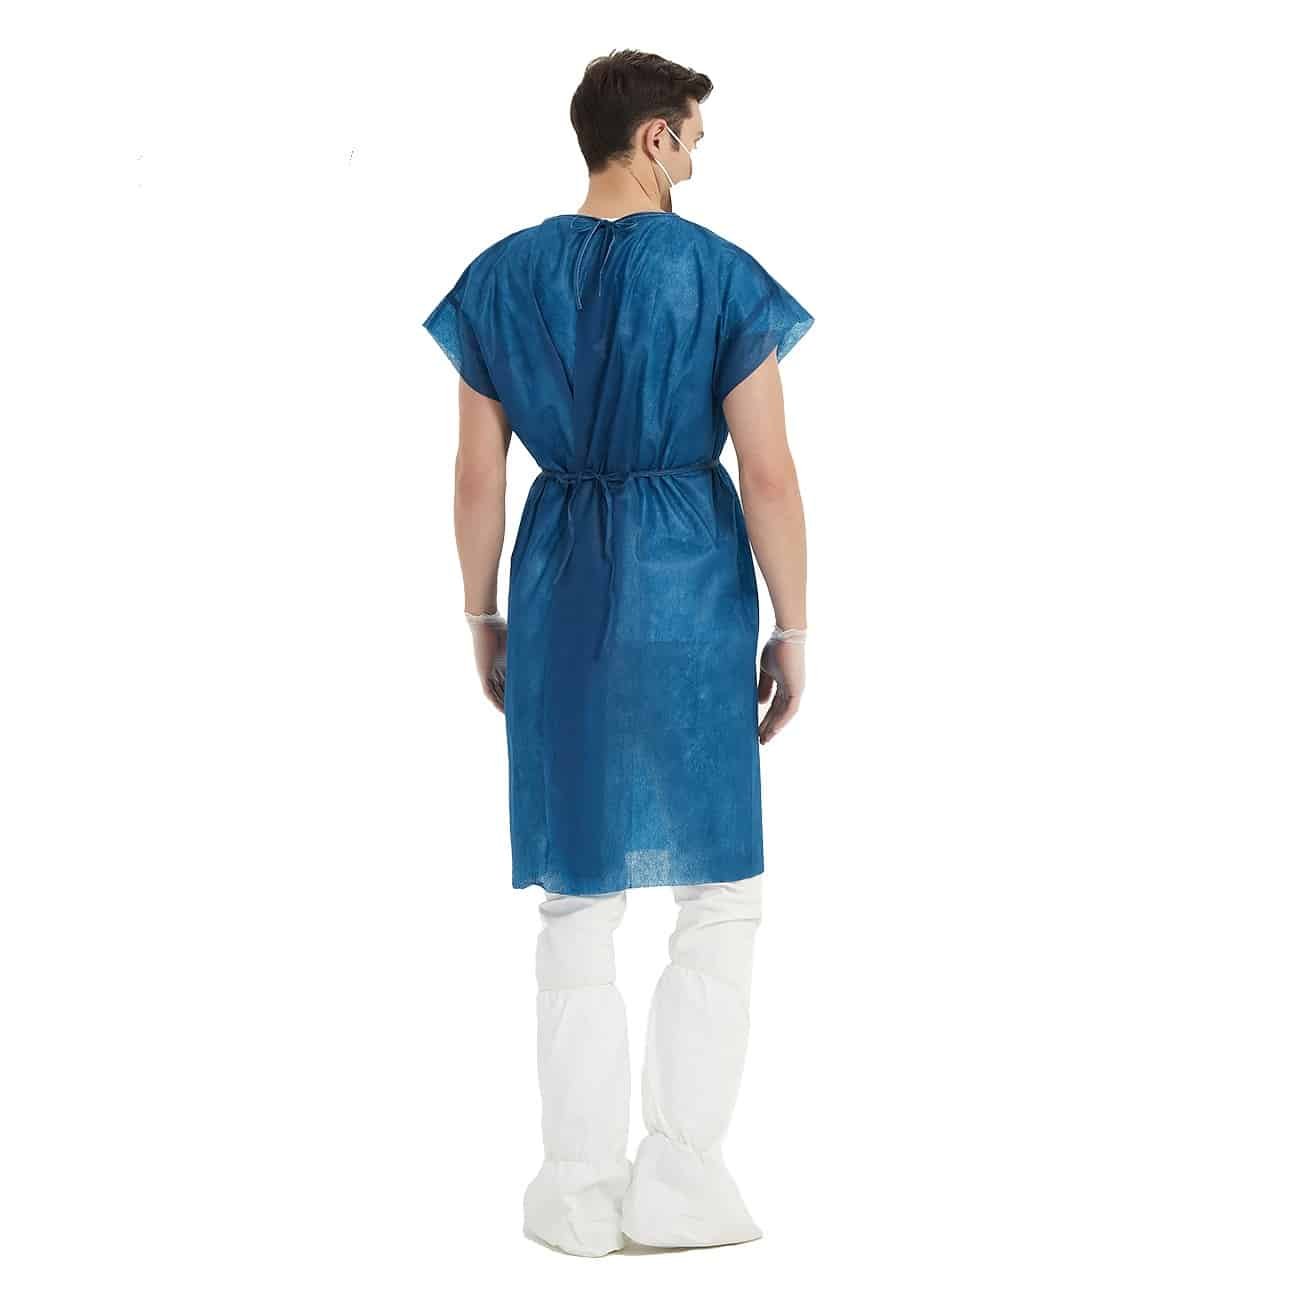 Men's Antimicrobial Open Back Hospital Gowns - Silverts